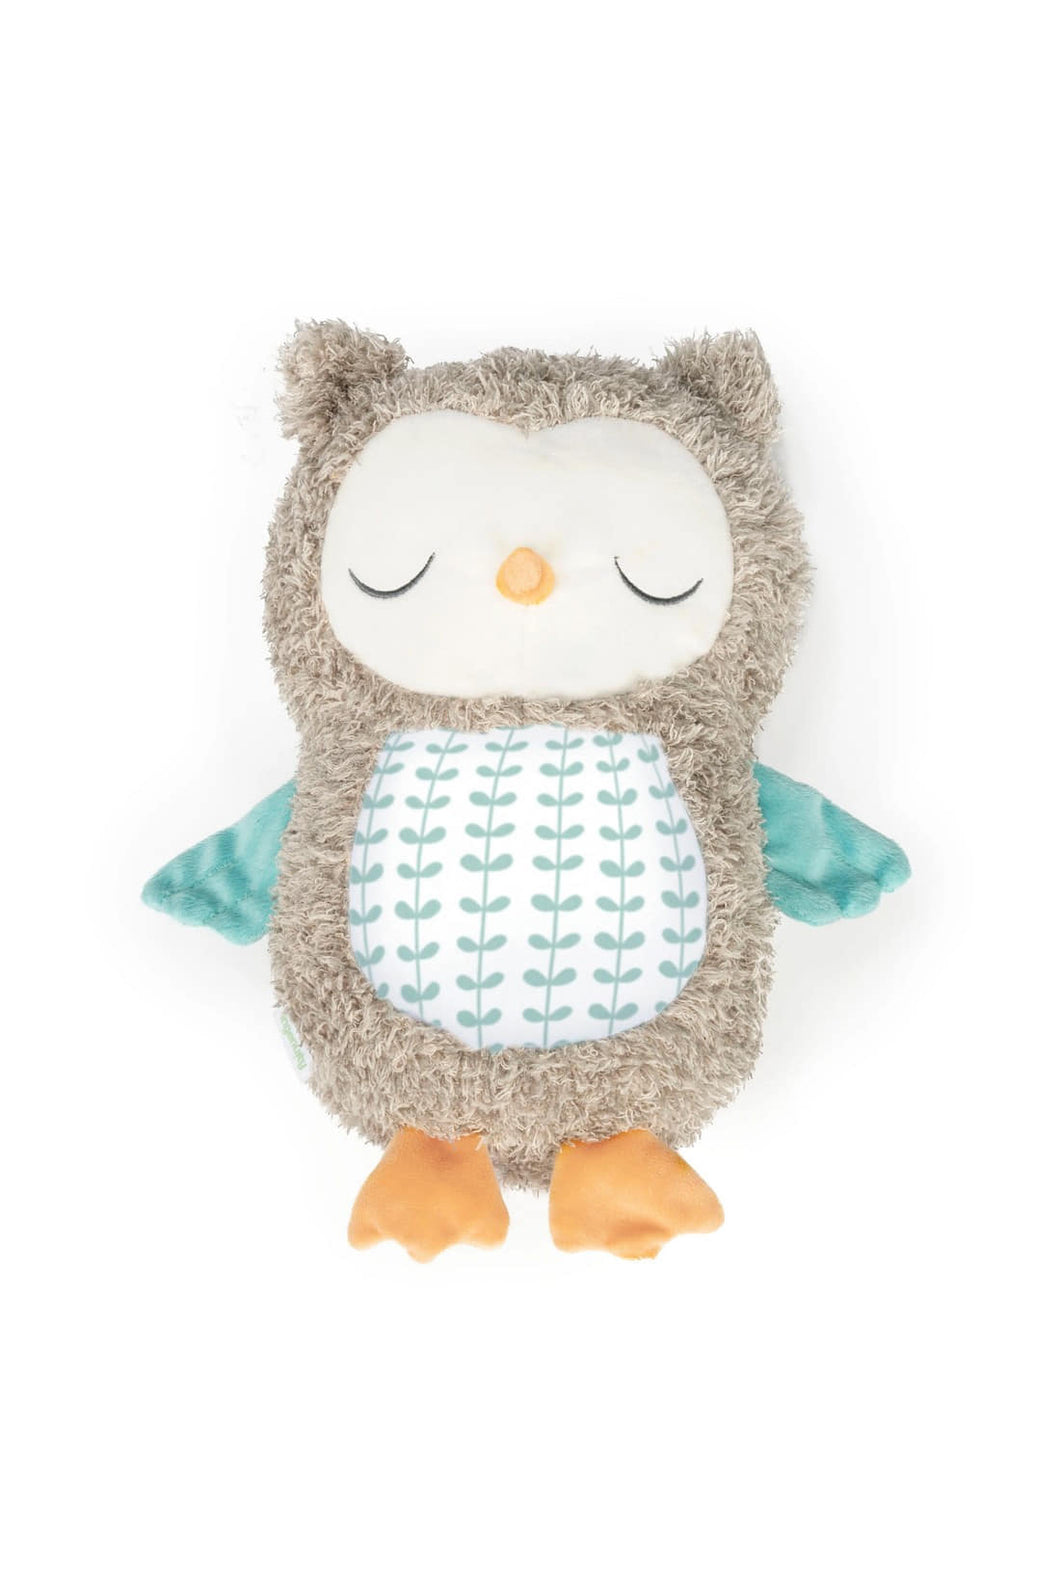 Ingenuity Snuggle Sounds Soothing Plush Toy Nally the Owl